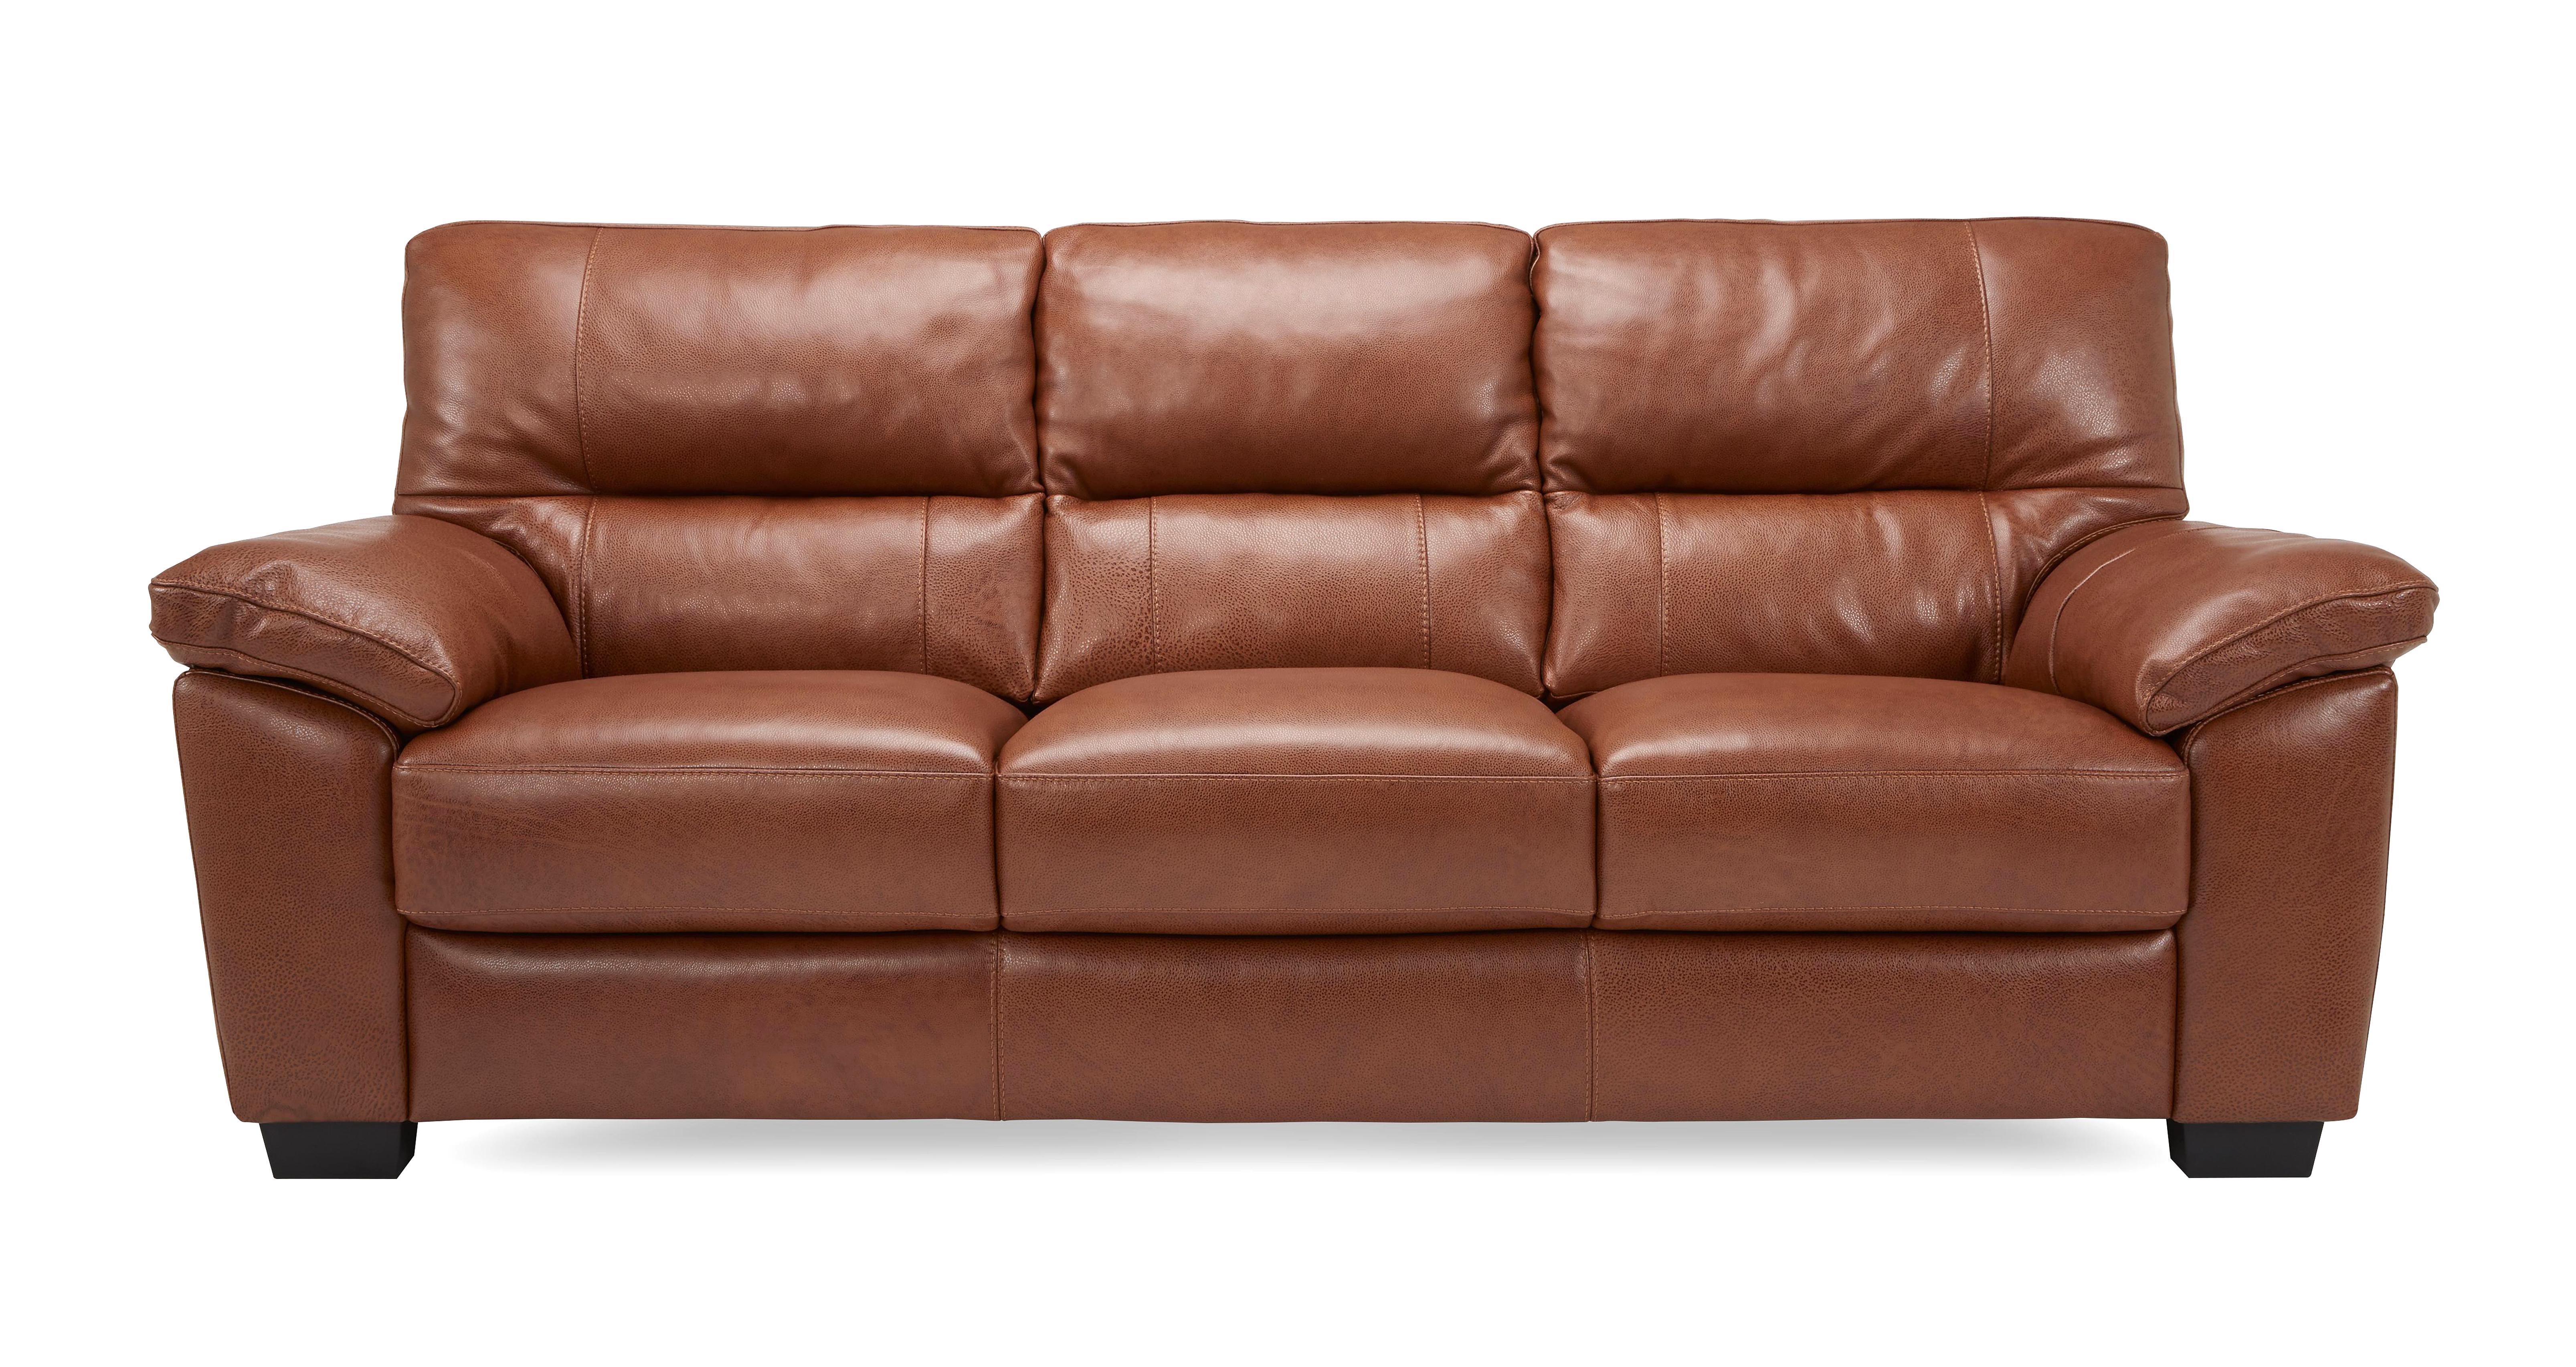 leather sofa for sale in islamabad